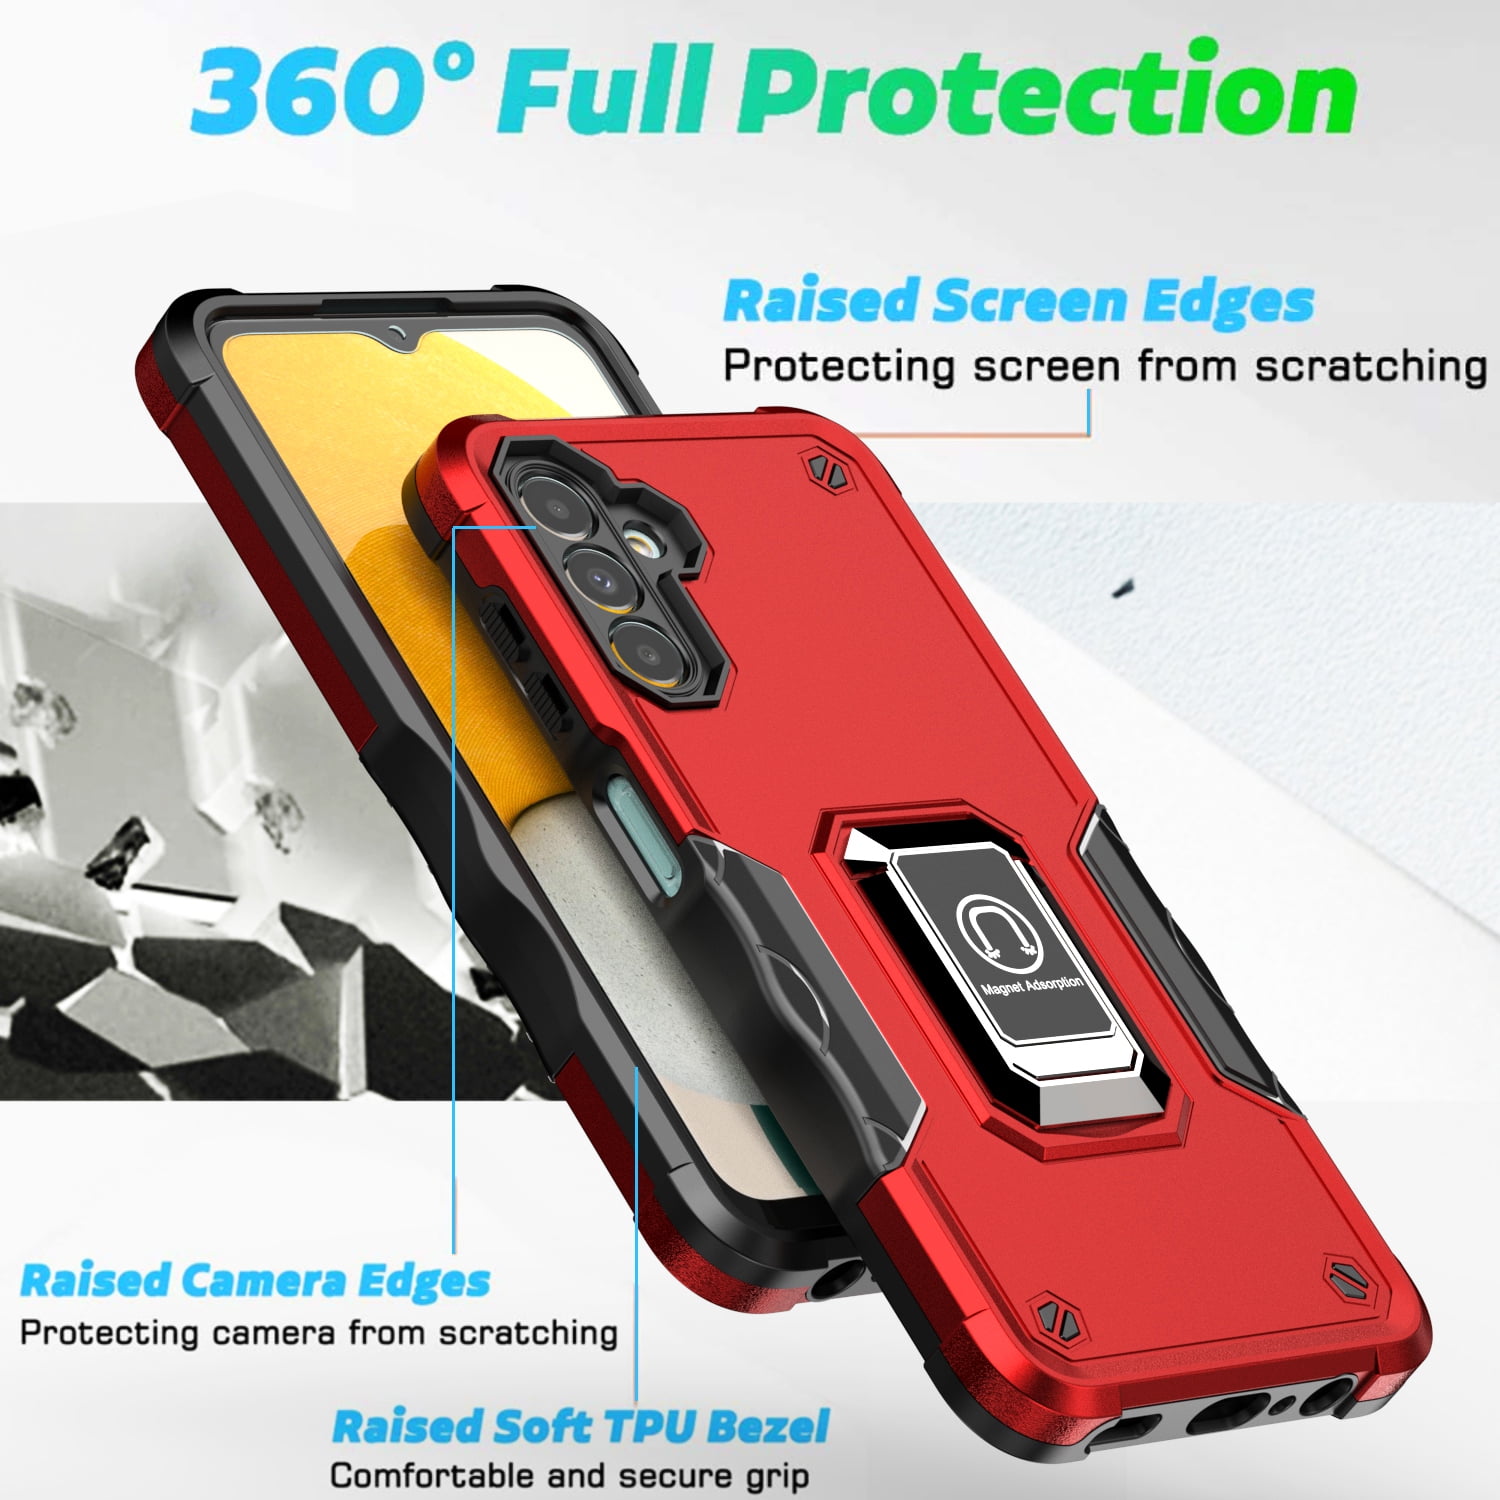 for Huawei Mate 20 Lite Case, 2 in 1 Hybrid Heavy Duty Armor Shockproof  Defender Kickstand Dual Layer Bumper Hard Back Case Cover Tempered Glass